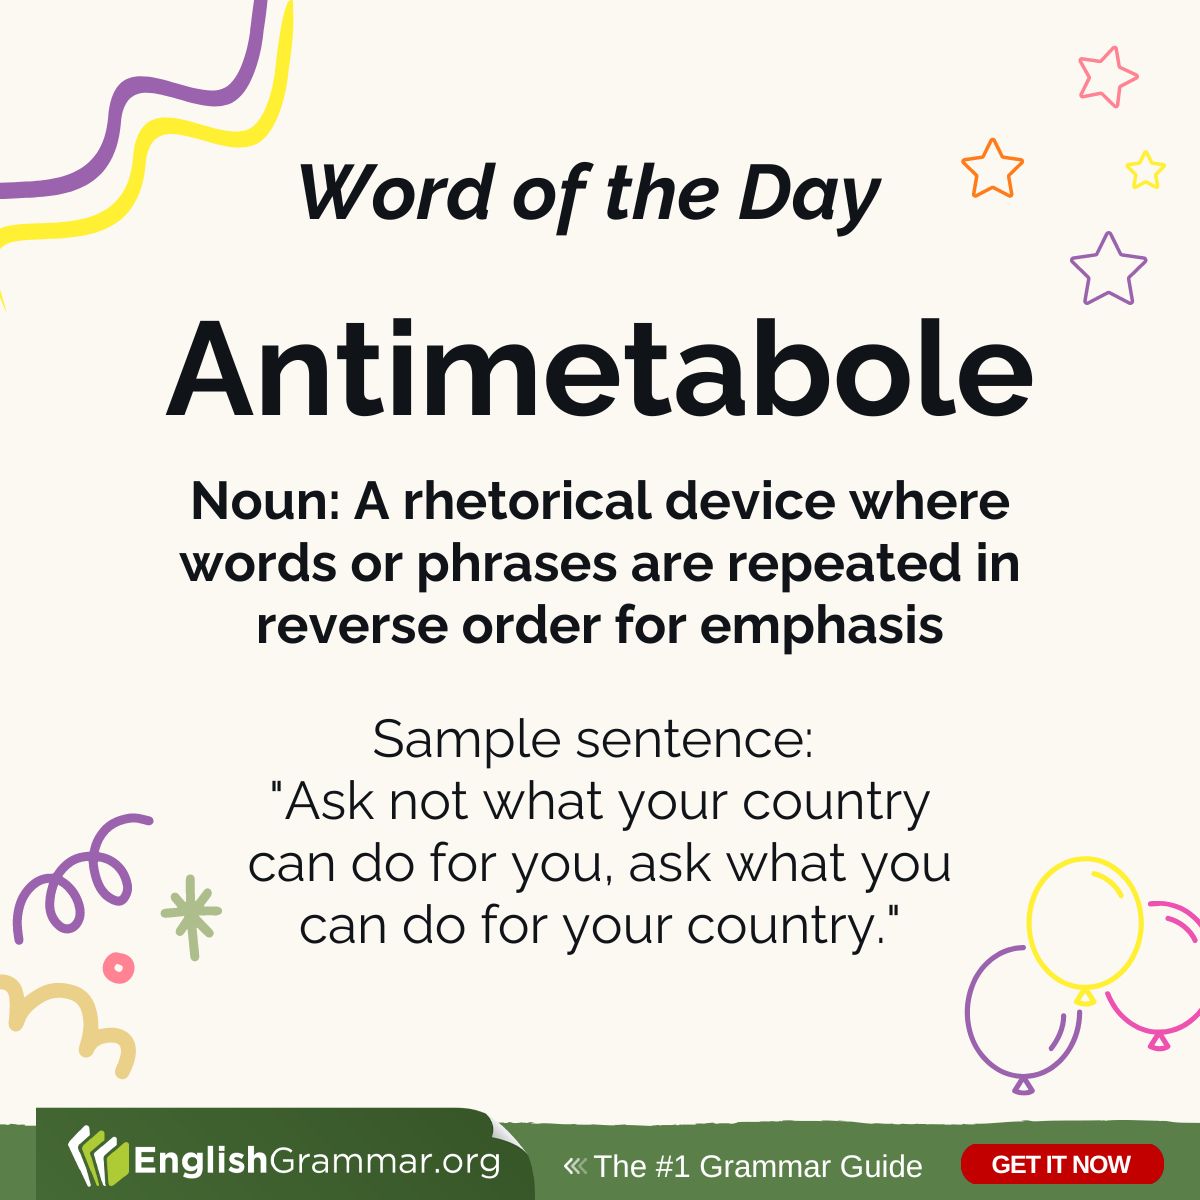 Can you give your own example of an antimetabole?

#vocabulary #writing #amwriting